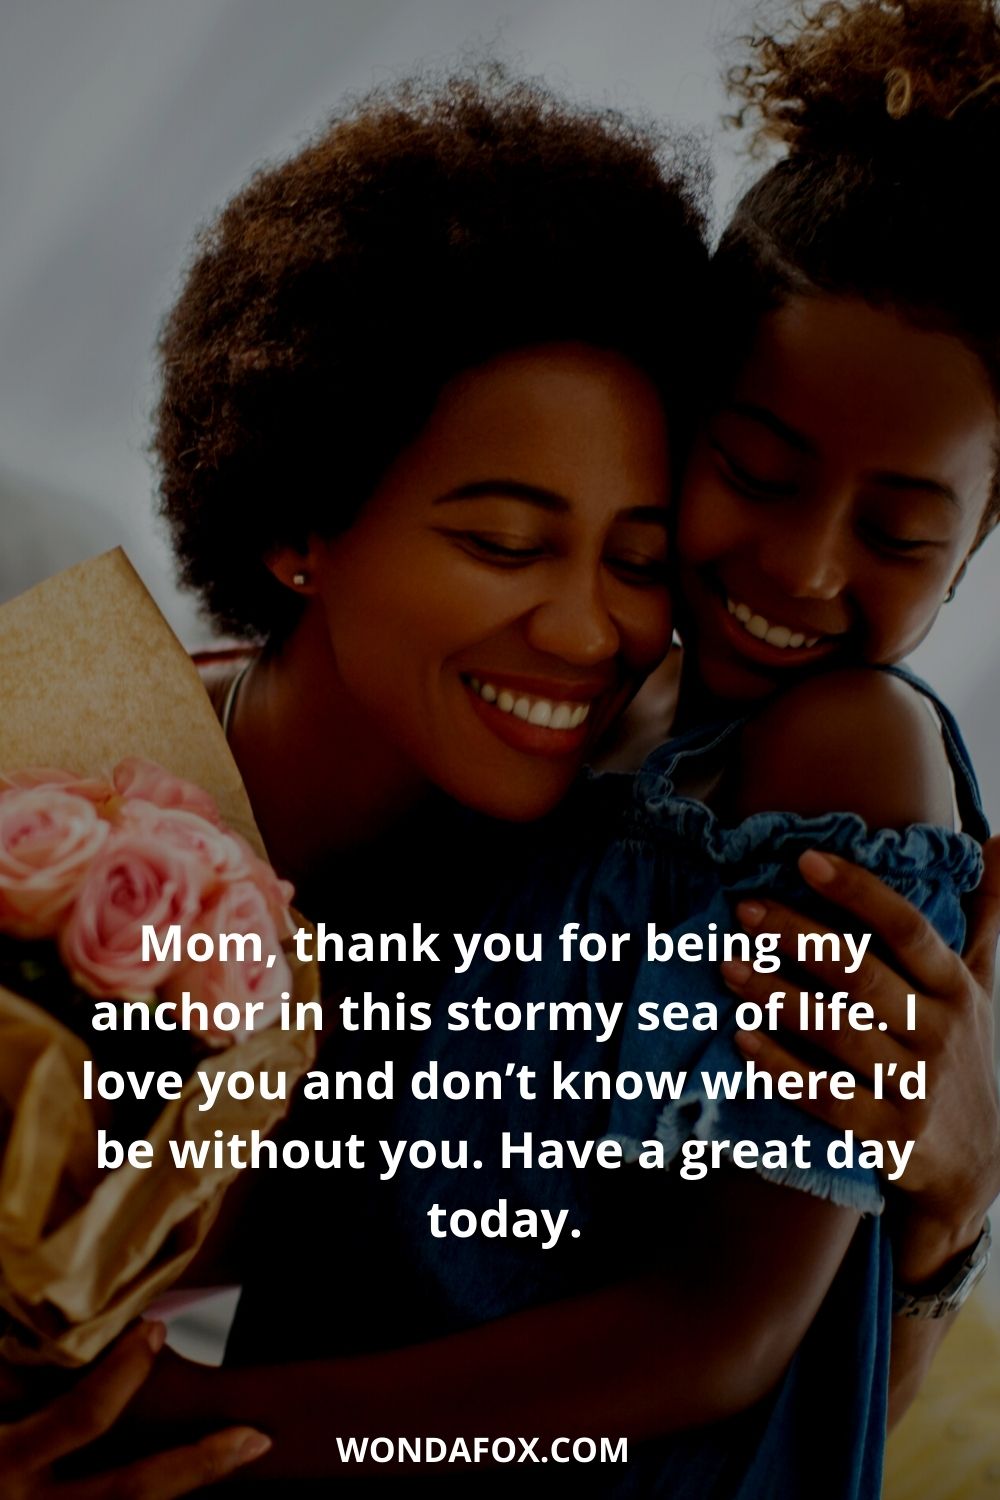 Mom, thank you for being my anchor in this stormy sea of life. I love you and don’t know where I’d be without you. Have a great day today.